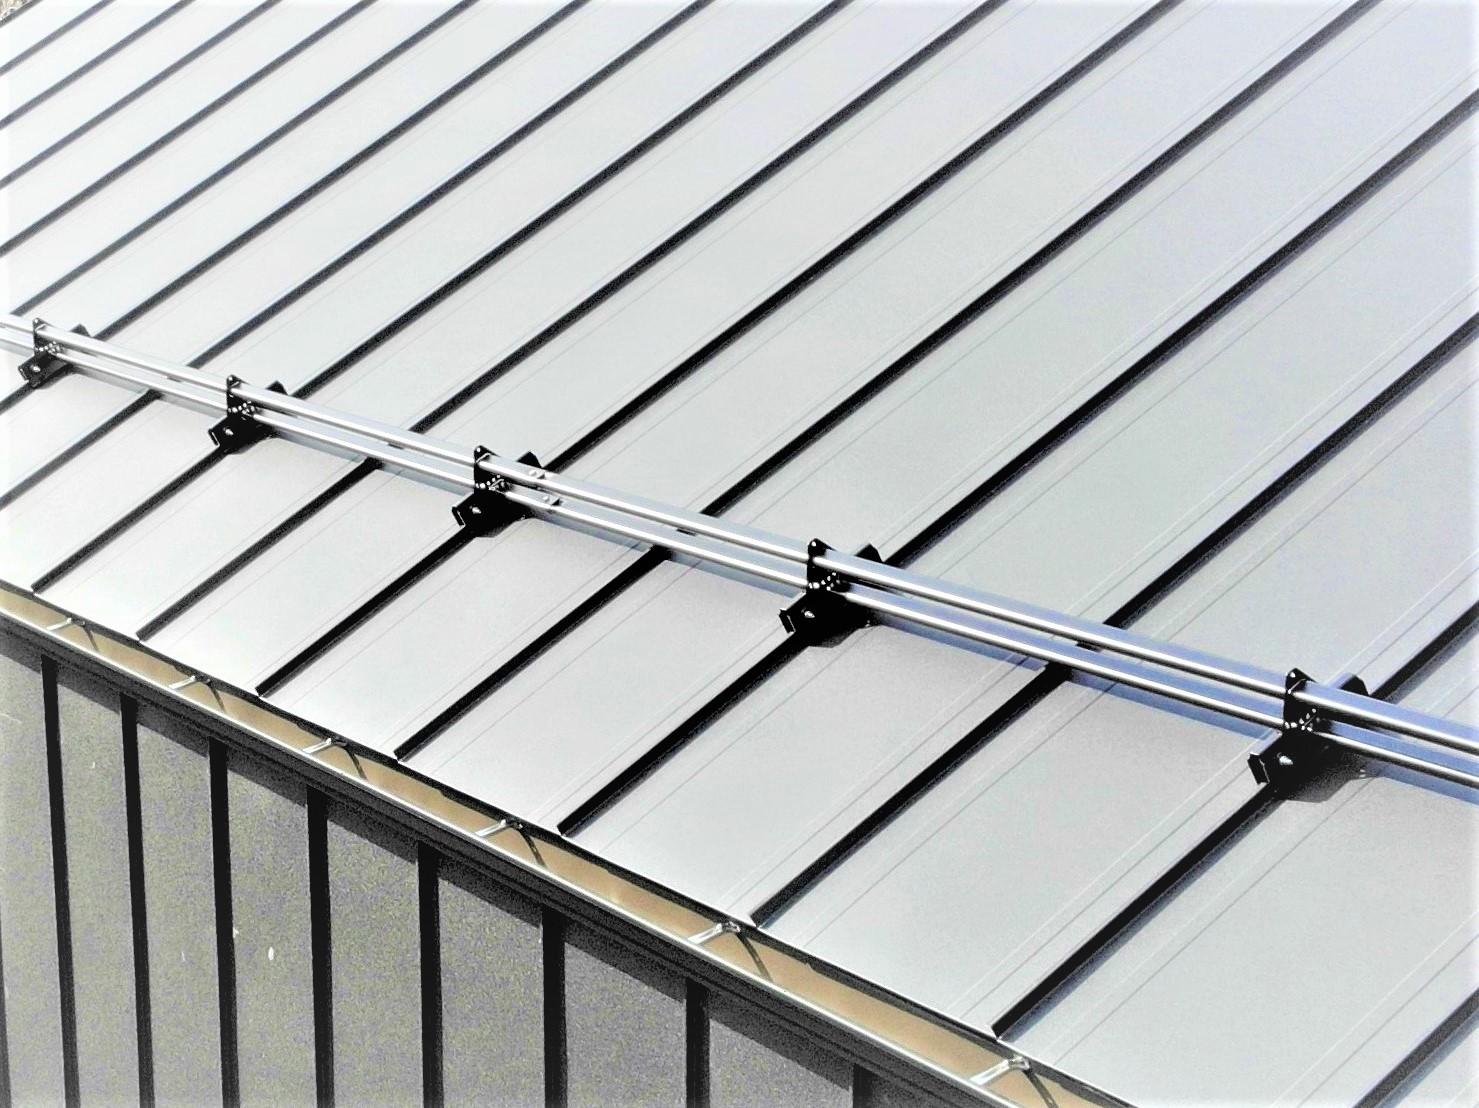 Snow Guards on Standing Seam Metal Roof